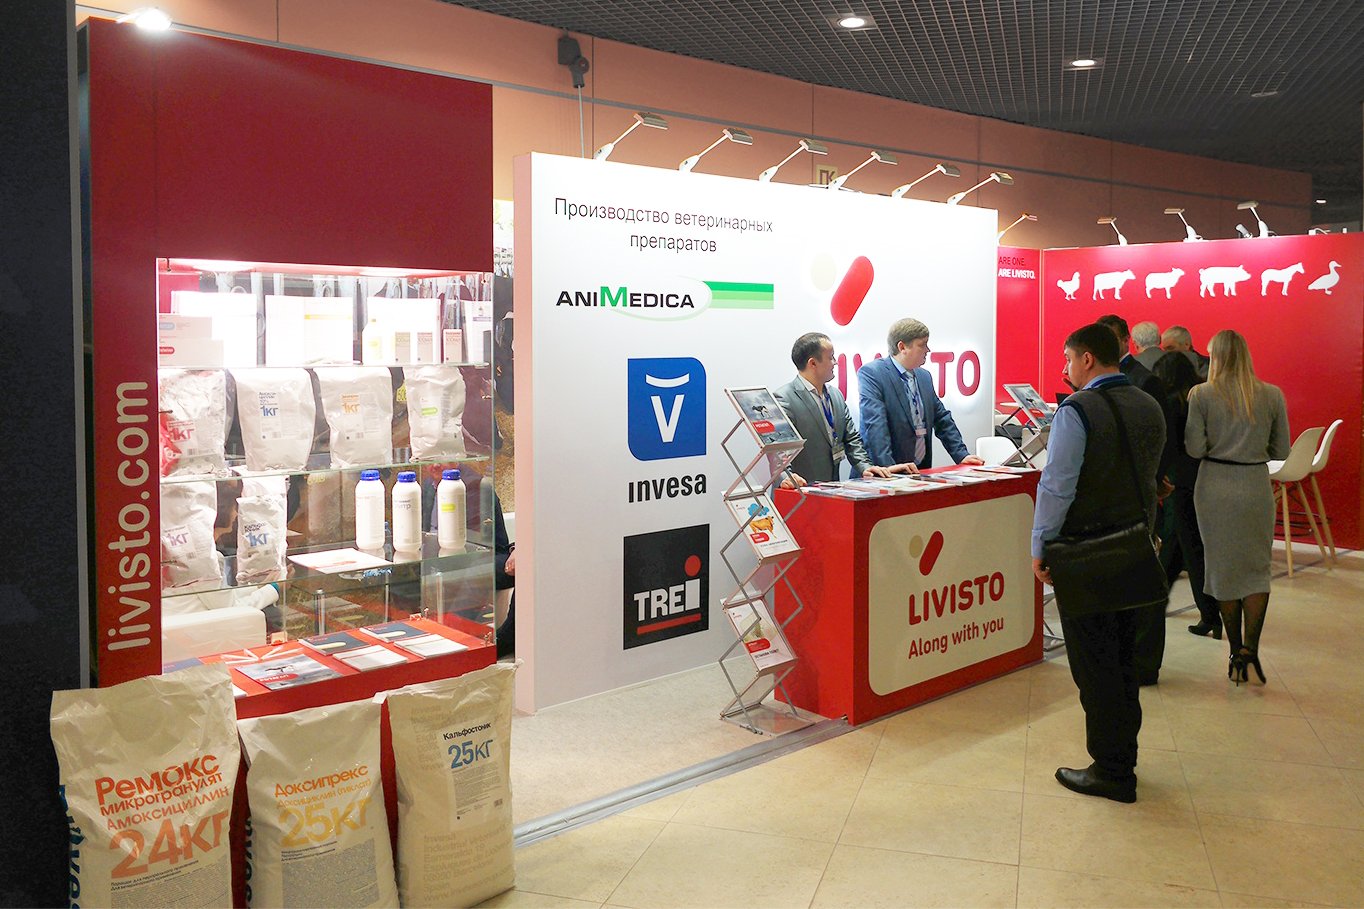 booth of Livisto company at the Russian exhibition